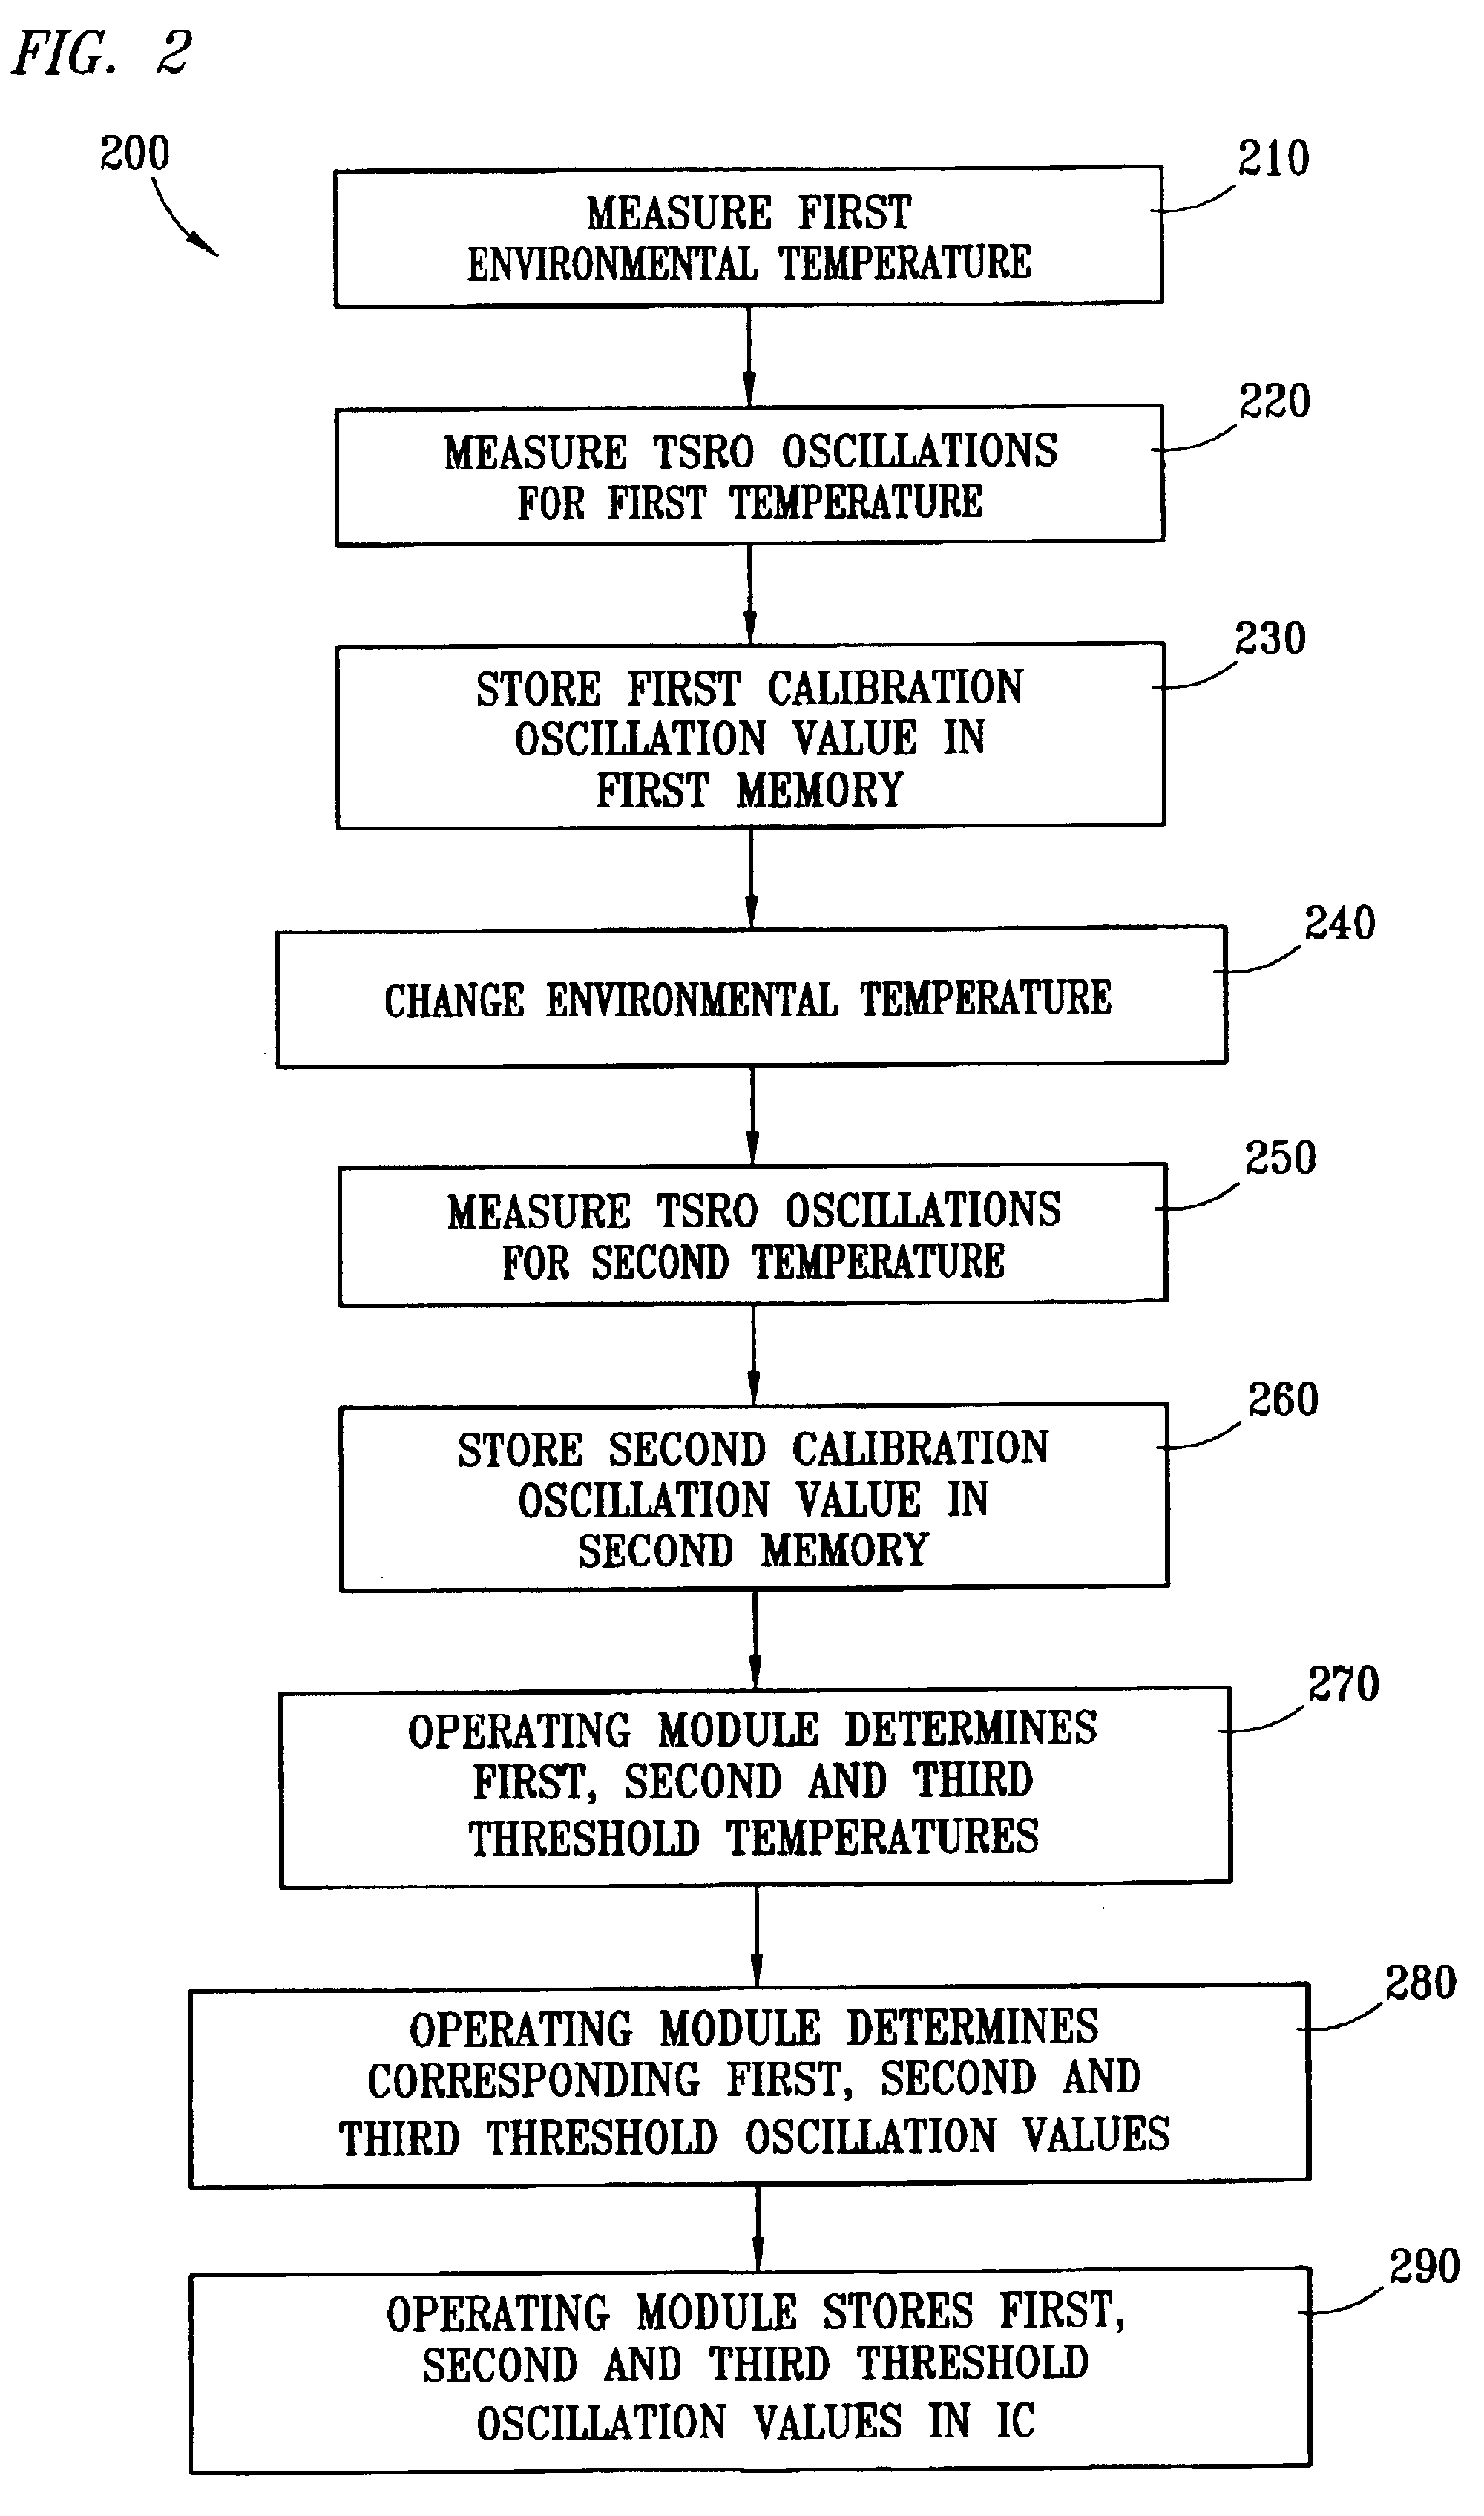 Method and apparatus to dynamically recalibrate VLSI chip thermal sensors through software control